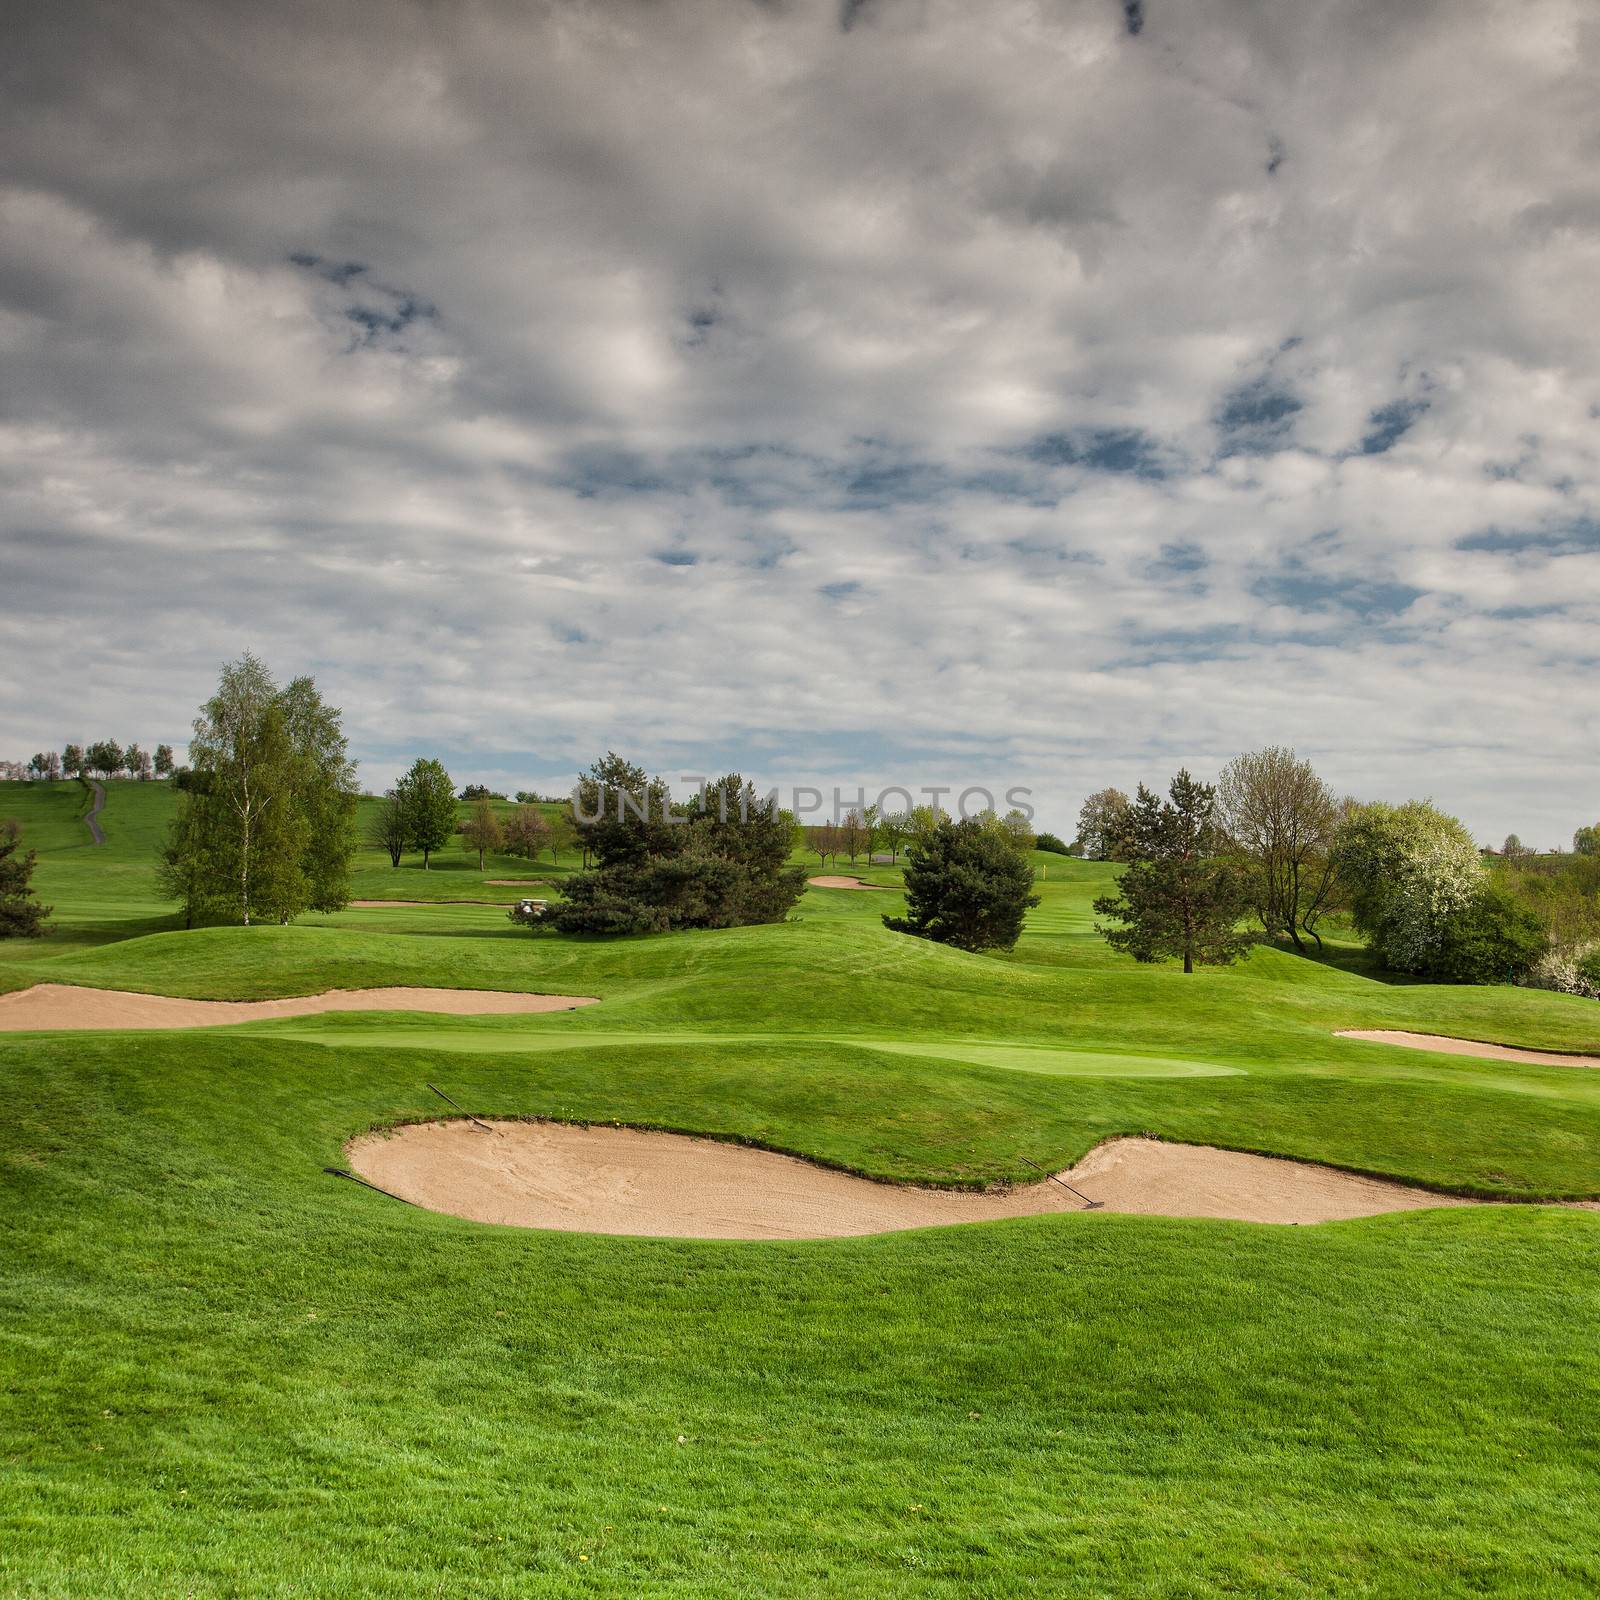 Bunkers on the golf course in Czech republic by CaptureLight